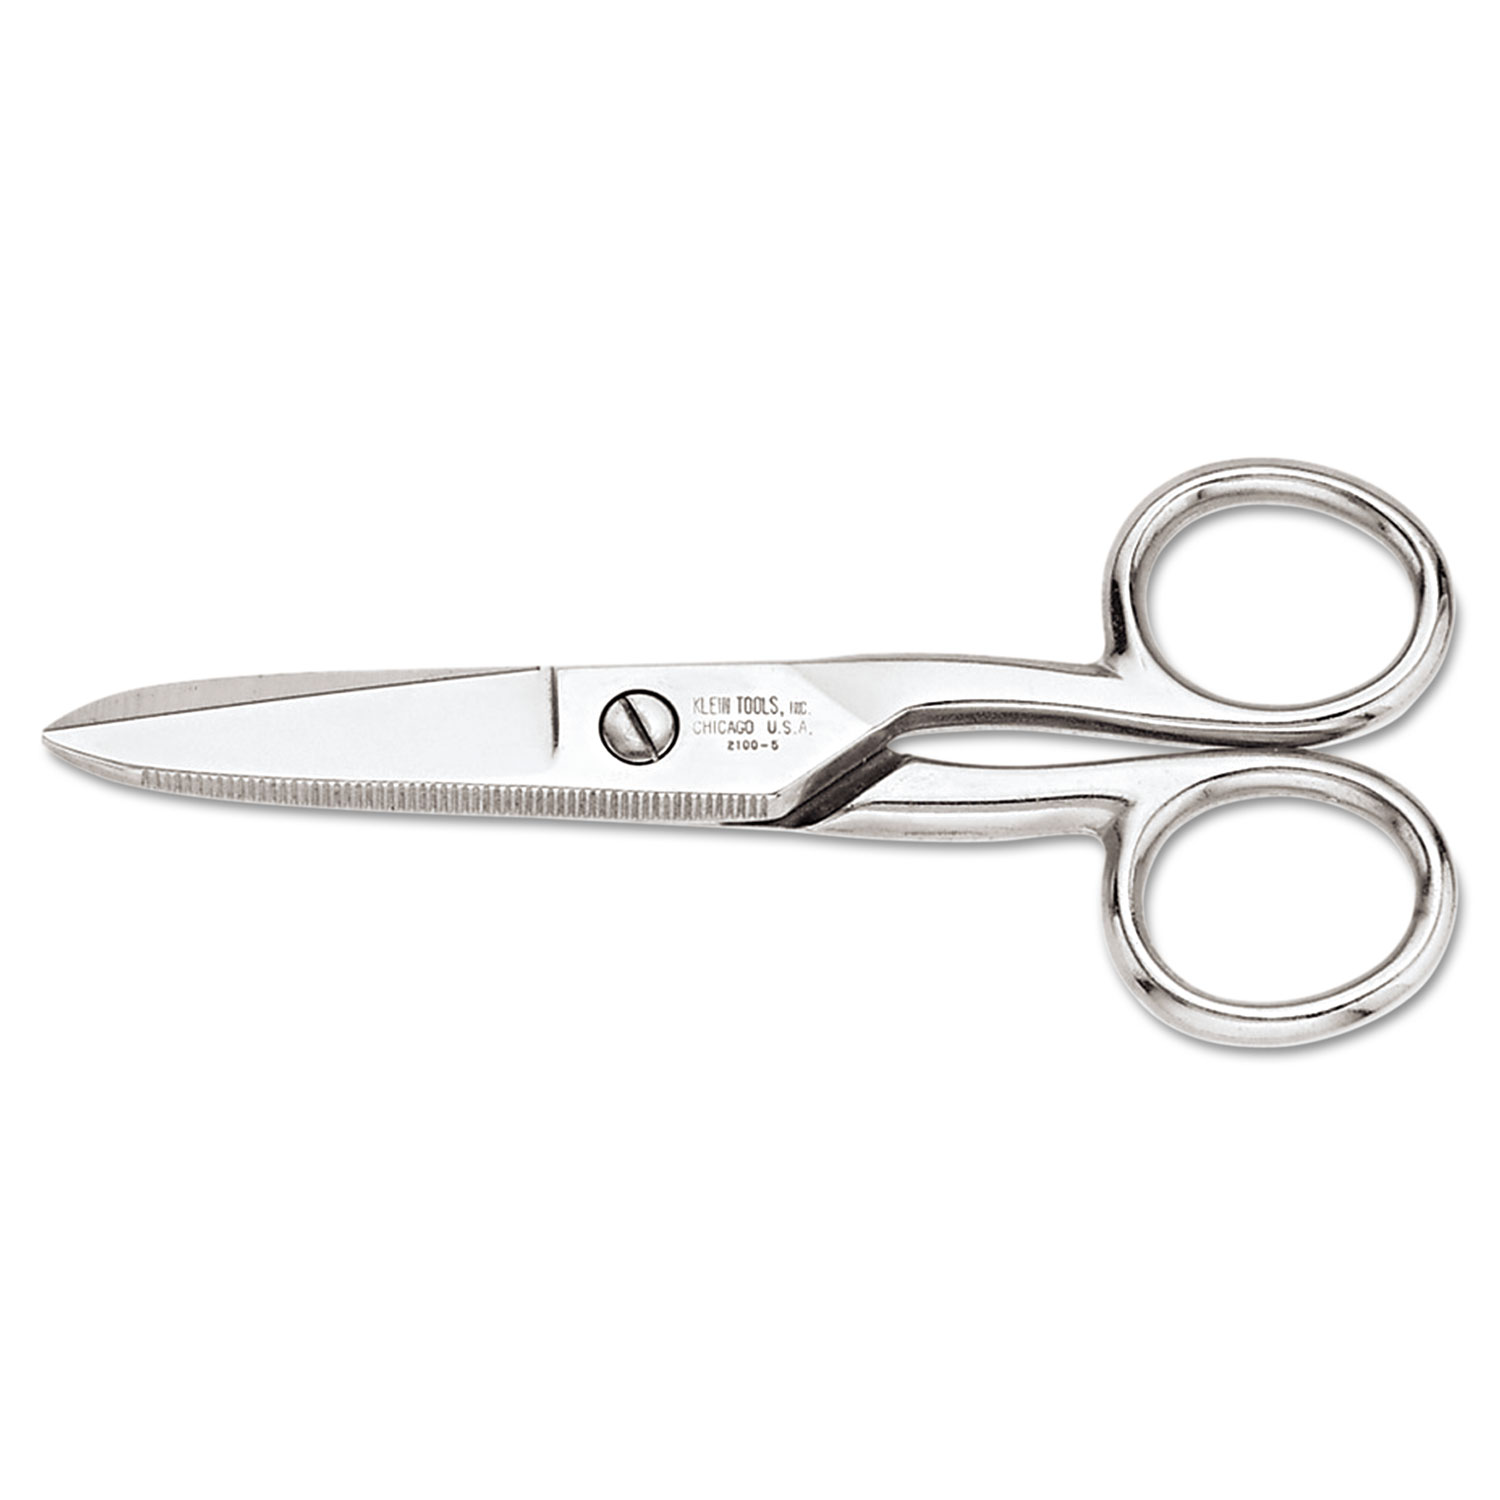  Klein Tools 9264476400 Electrician's Scissors 2100-5, Rounded Tip, 5.25 Long, Silver Straight Handle (KLN21005) 